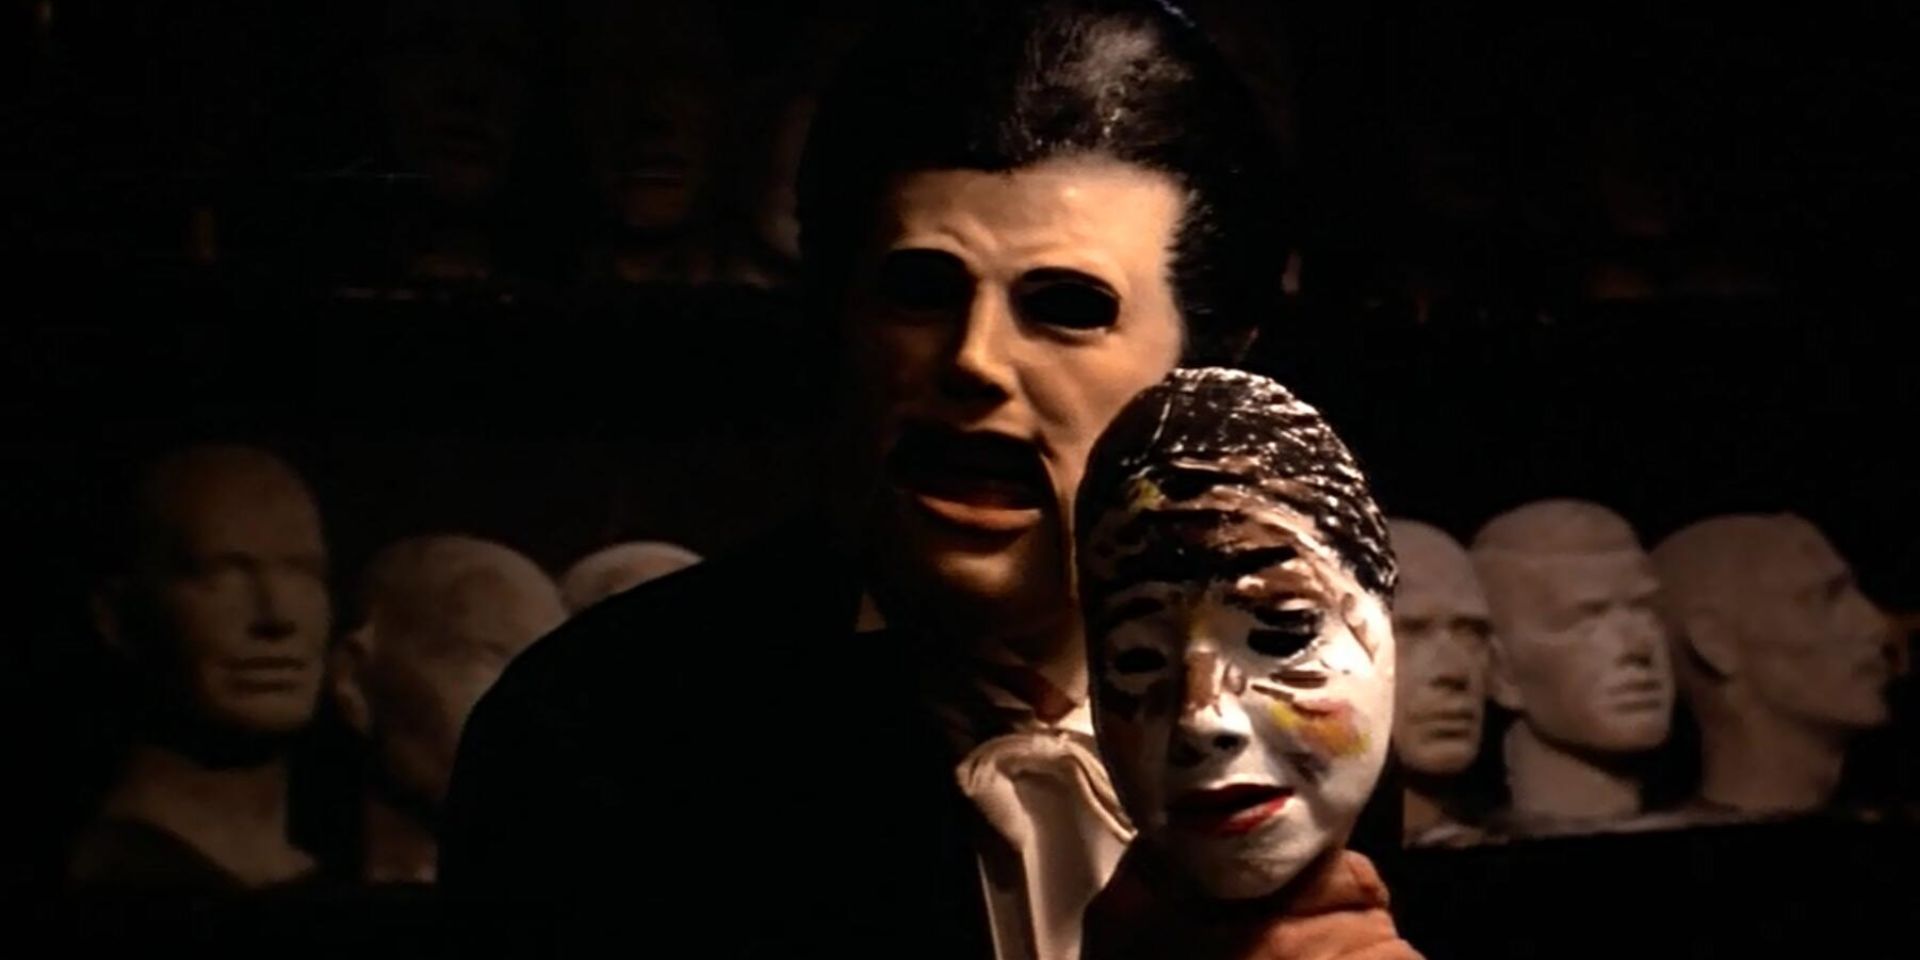 Villain with a mannequin in Tourist Trap